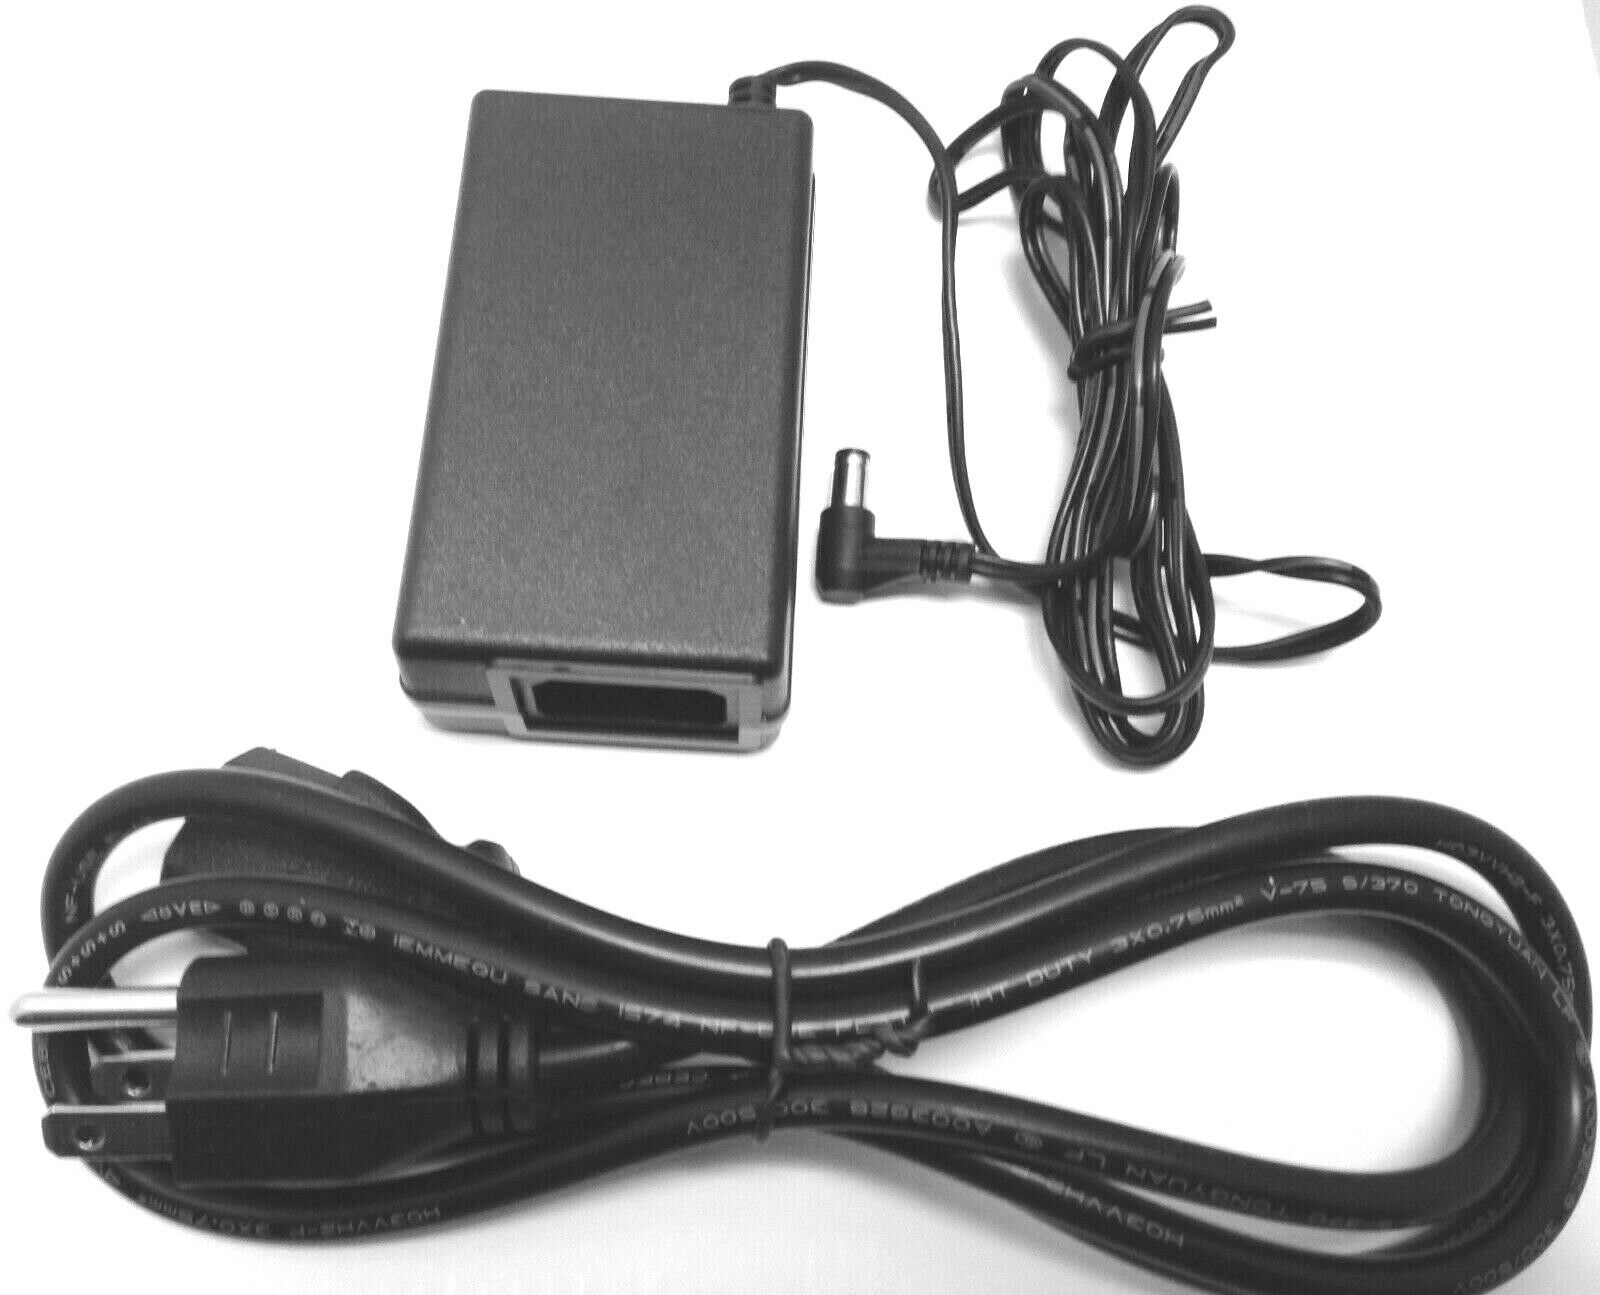 USED 48V Power Supply for Mitel 6900 6800 6700 Series IP Phone w/ power cord